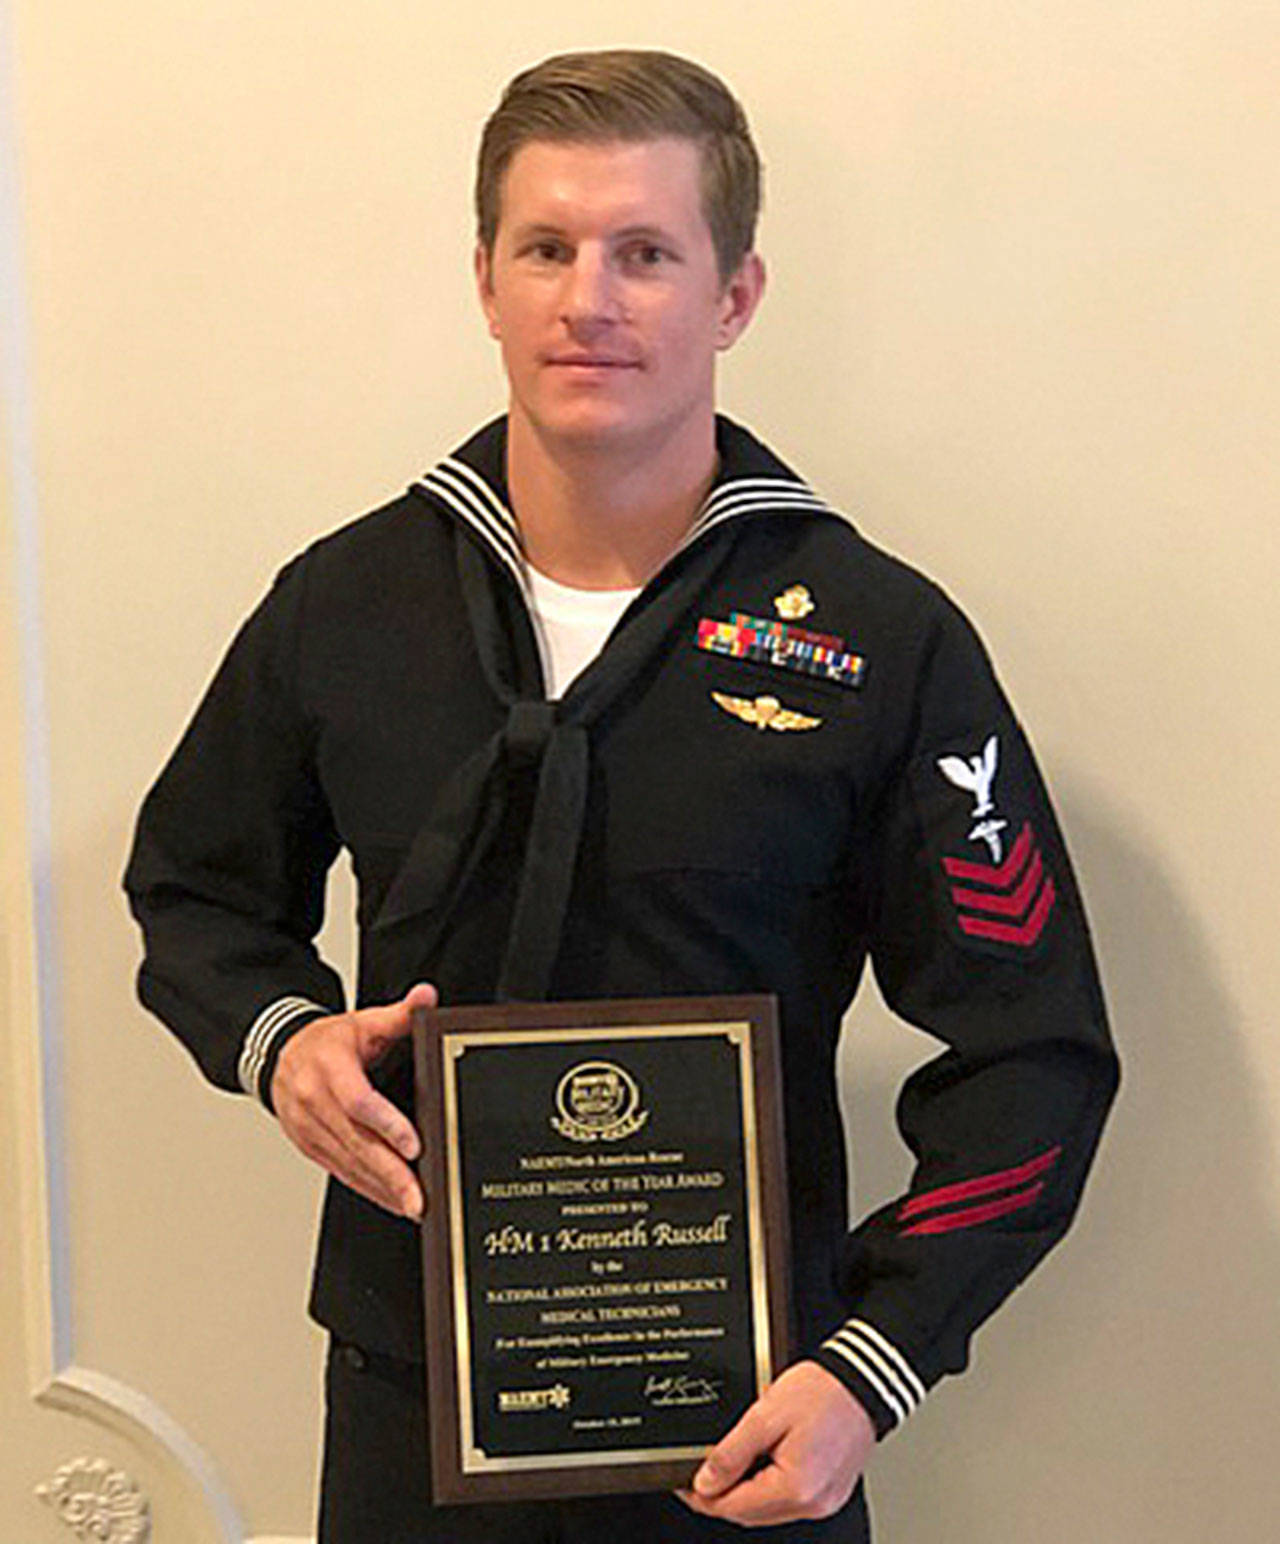 Kenneth Russell of Sequim was awarded the National Association of Emergency Medical Technician (NAEMT) North American Rescue Military Medic of the Year honor in October. Submitted photo